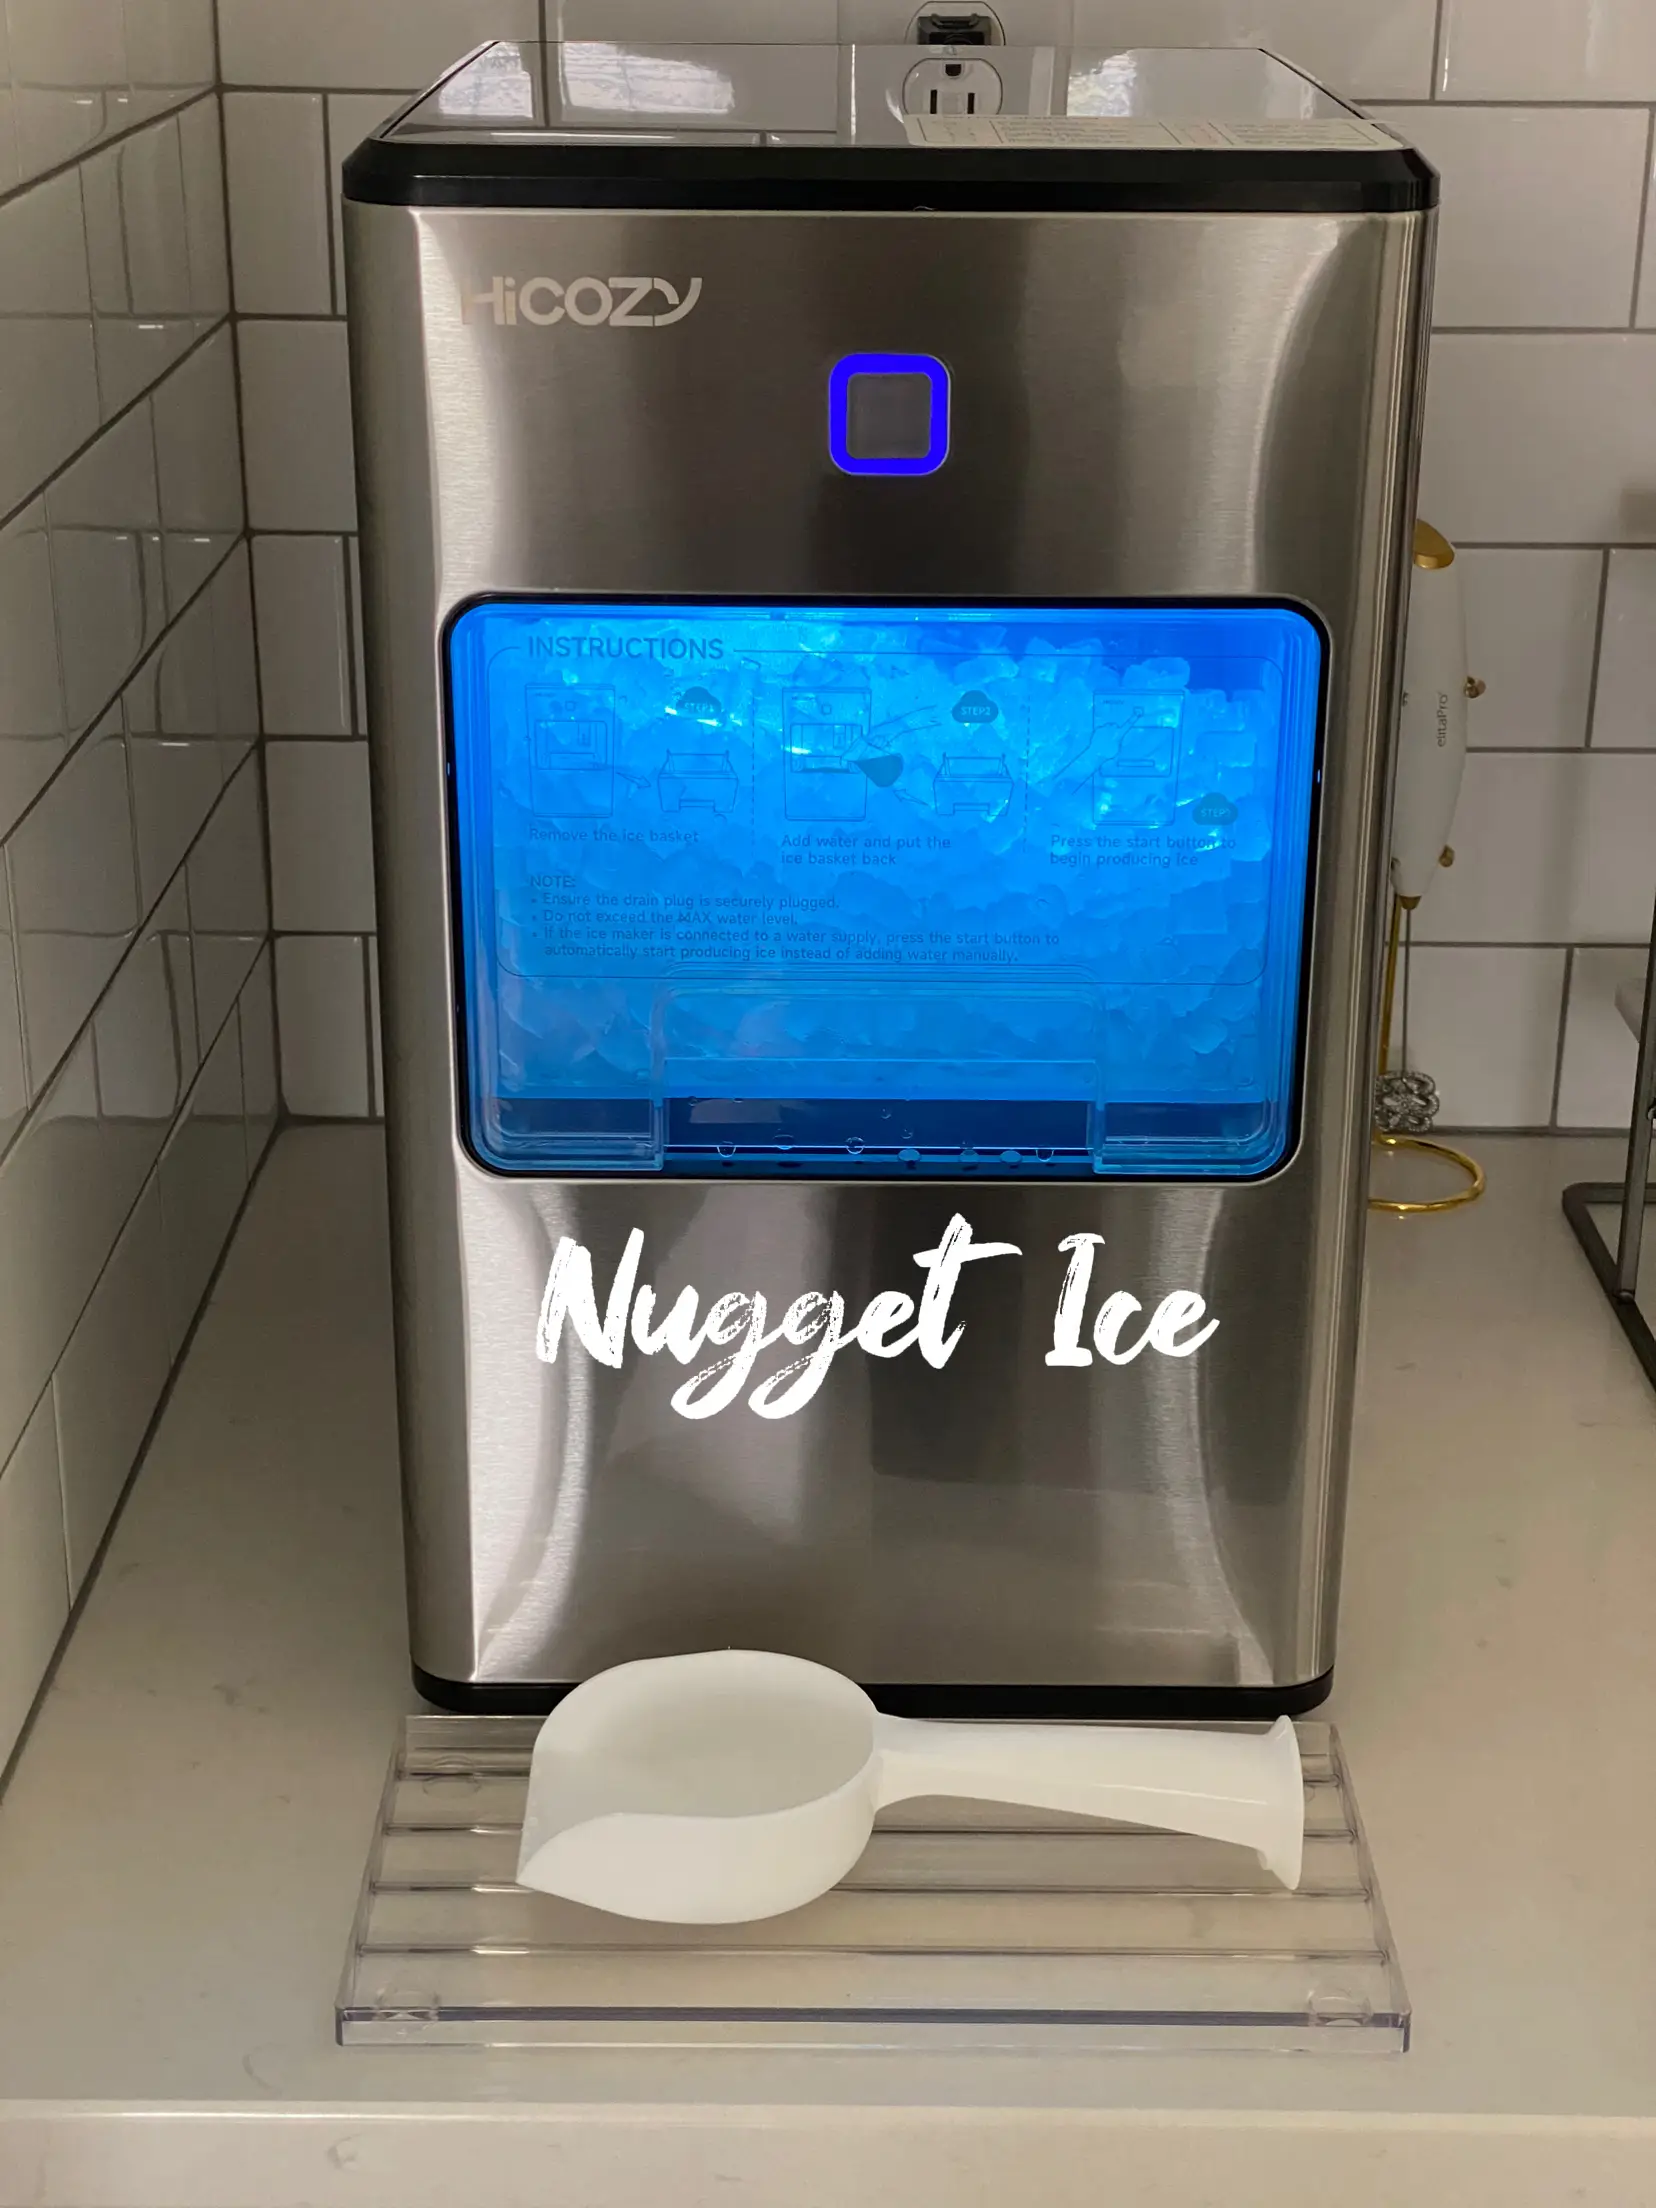 Nuggets ice just like chick-fil-a #nuggestice#icemakermachine#icemaker, ice  maker